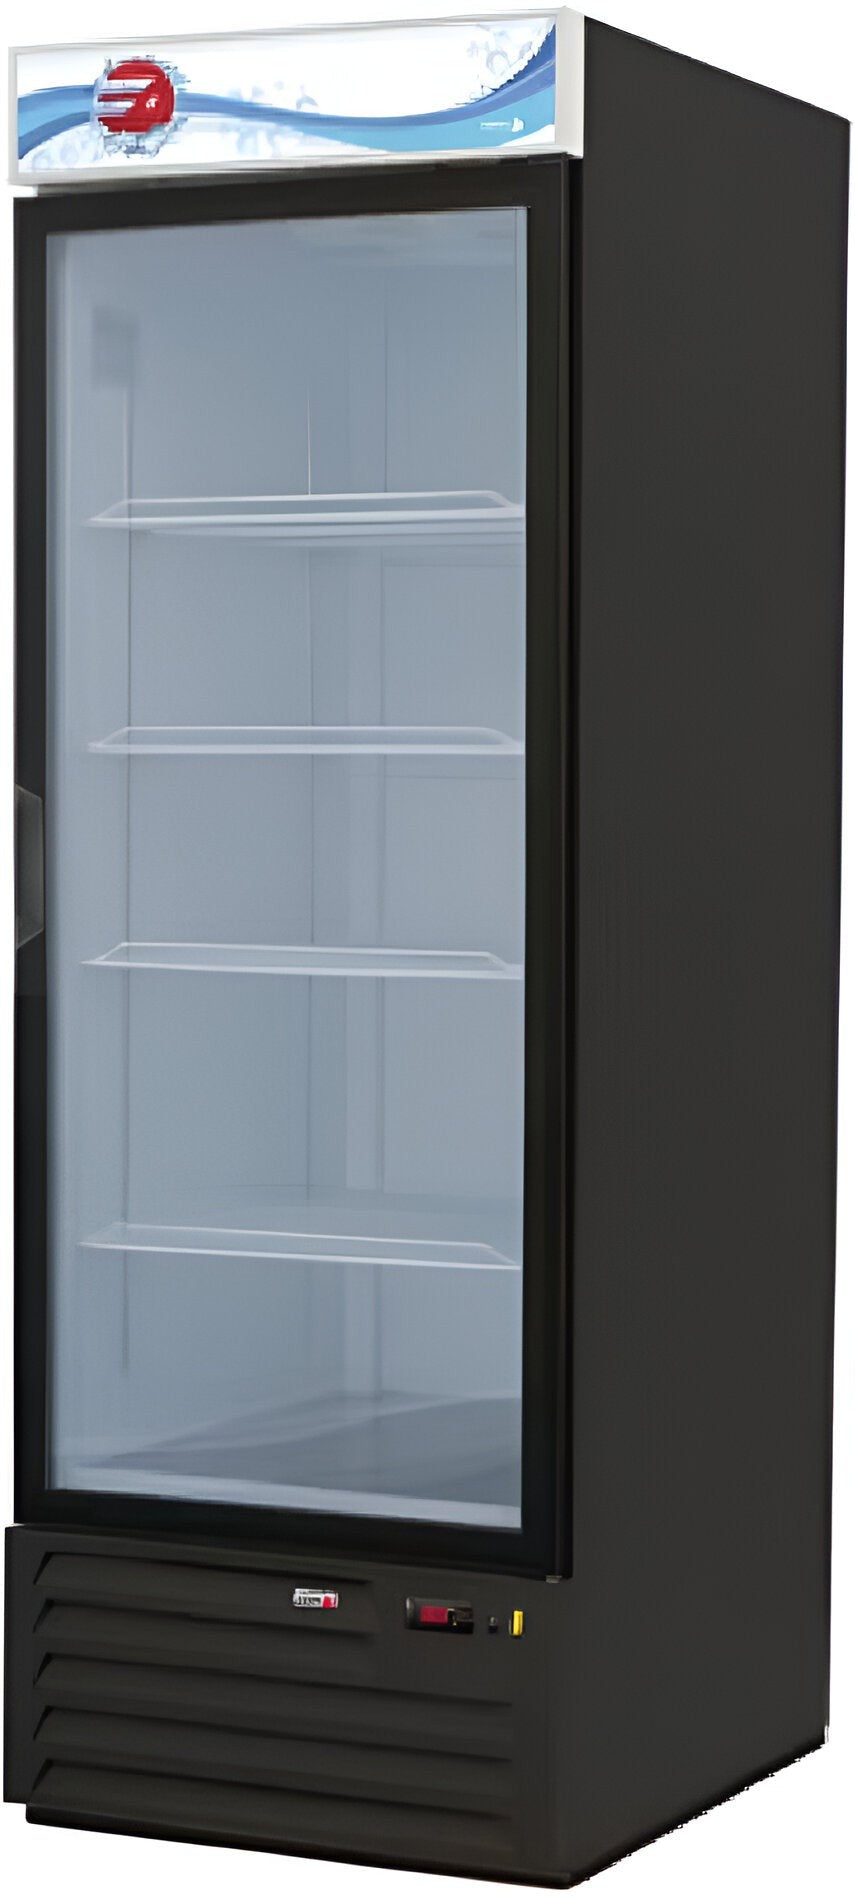 Fagor - 115 V Single Section Merchandisers Freezer With Swing Door - FMD-23F